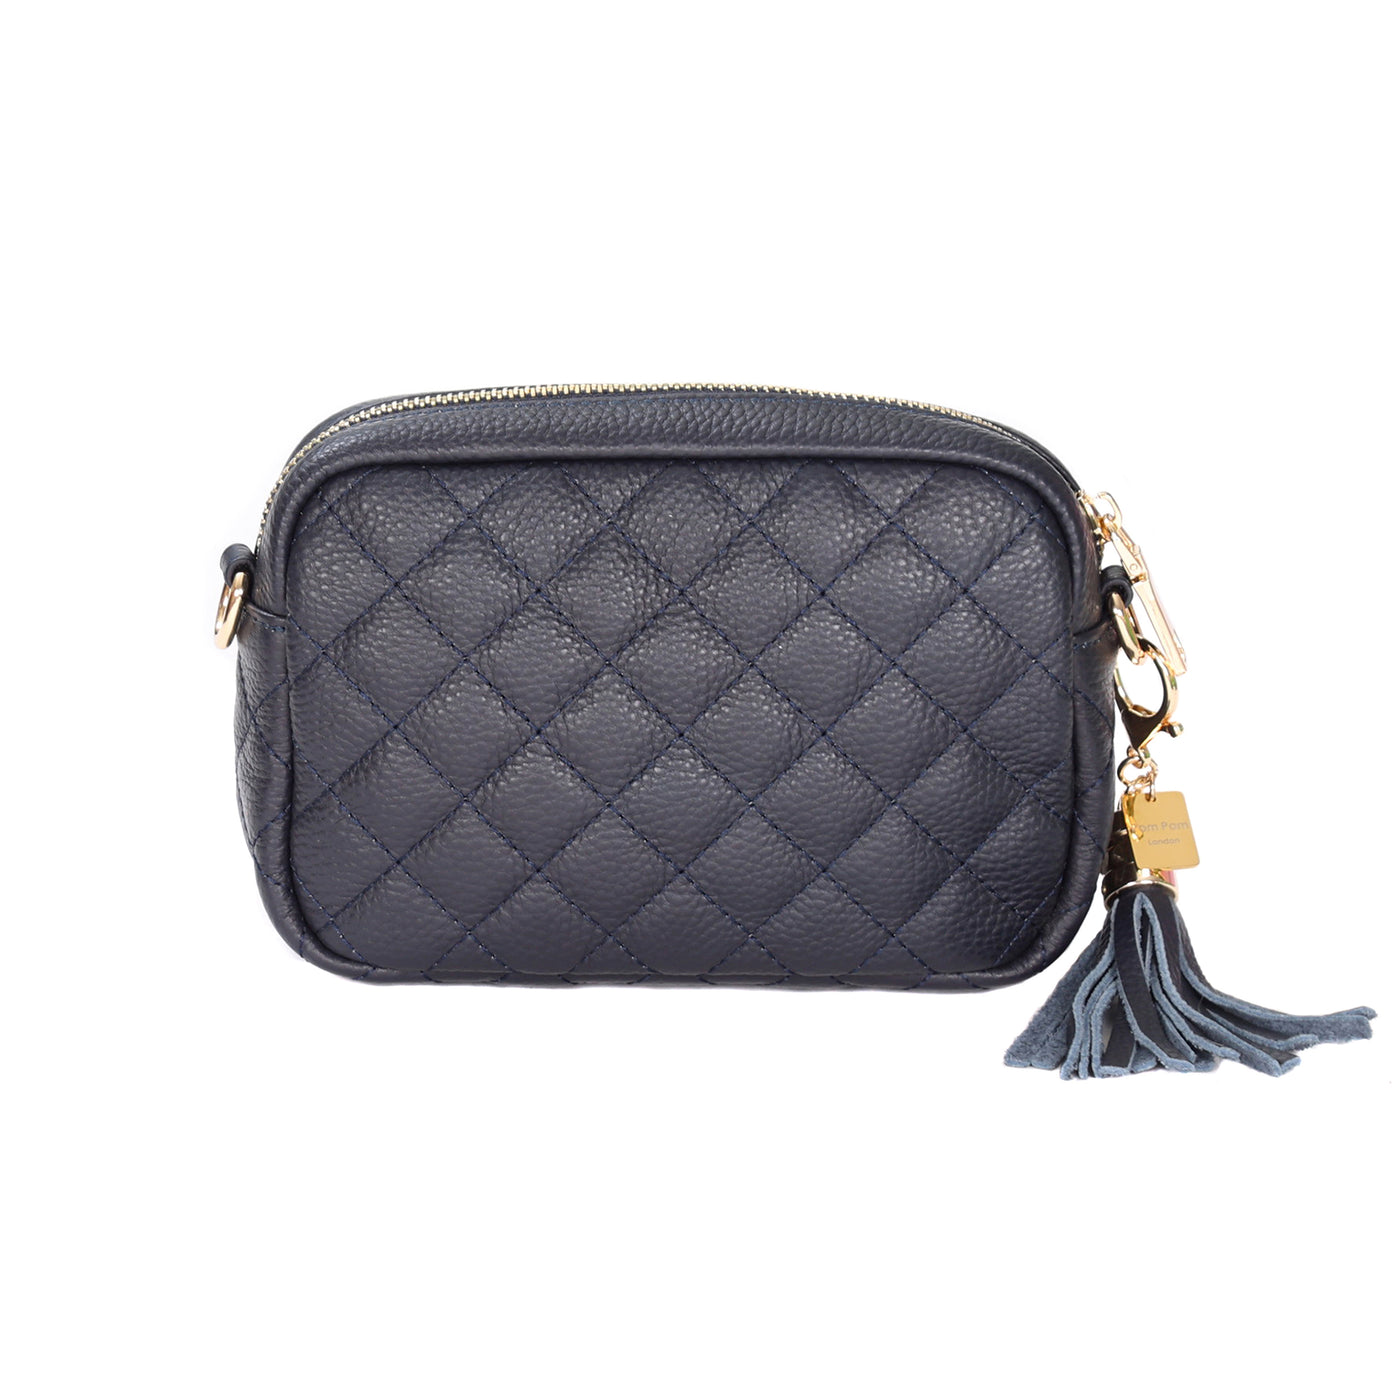 Quilted City MINI Bag Navy & Accessories - Pom Pom London